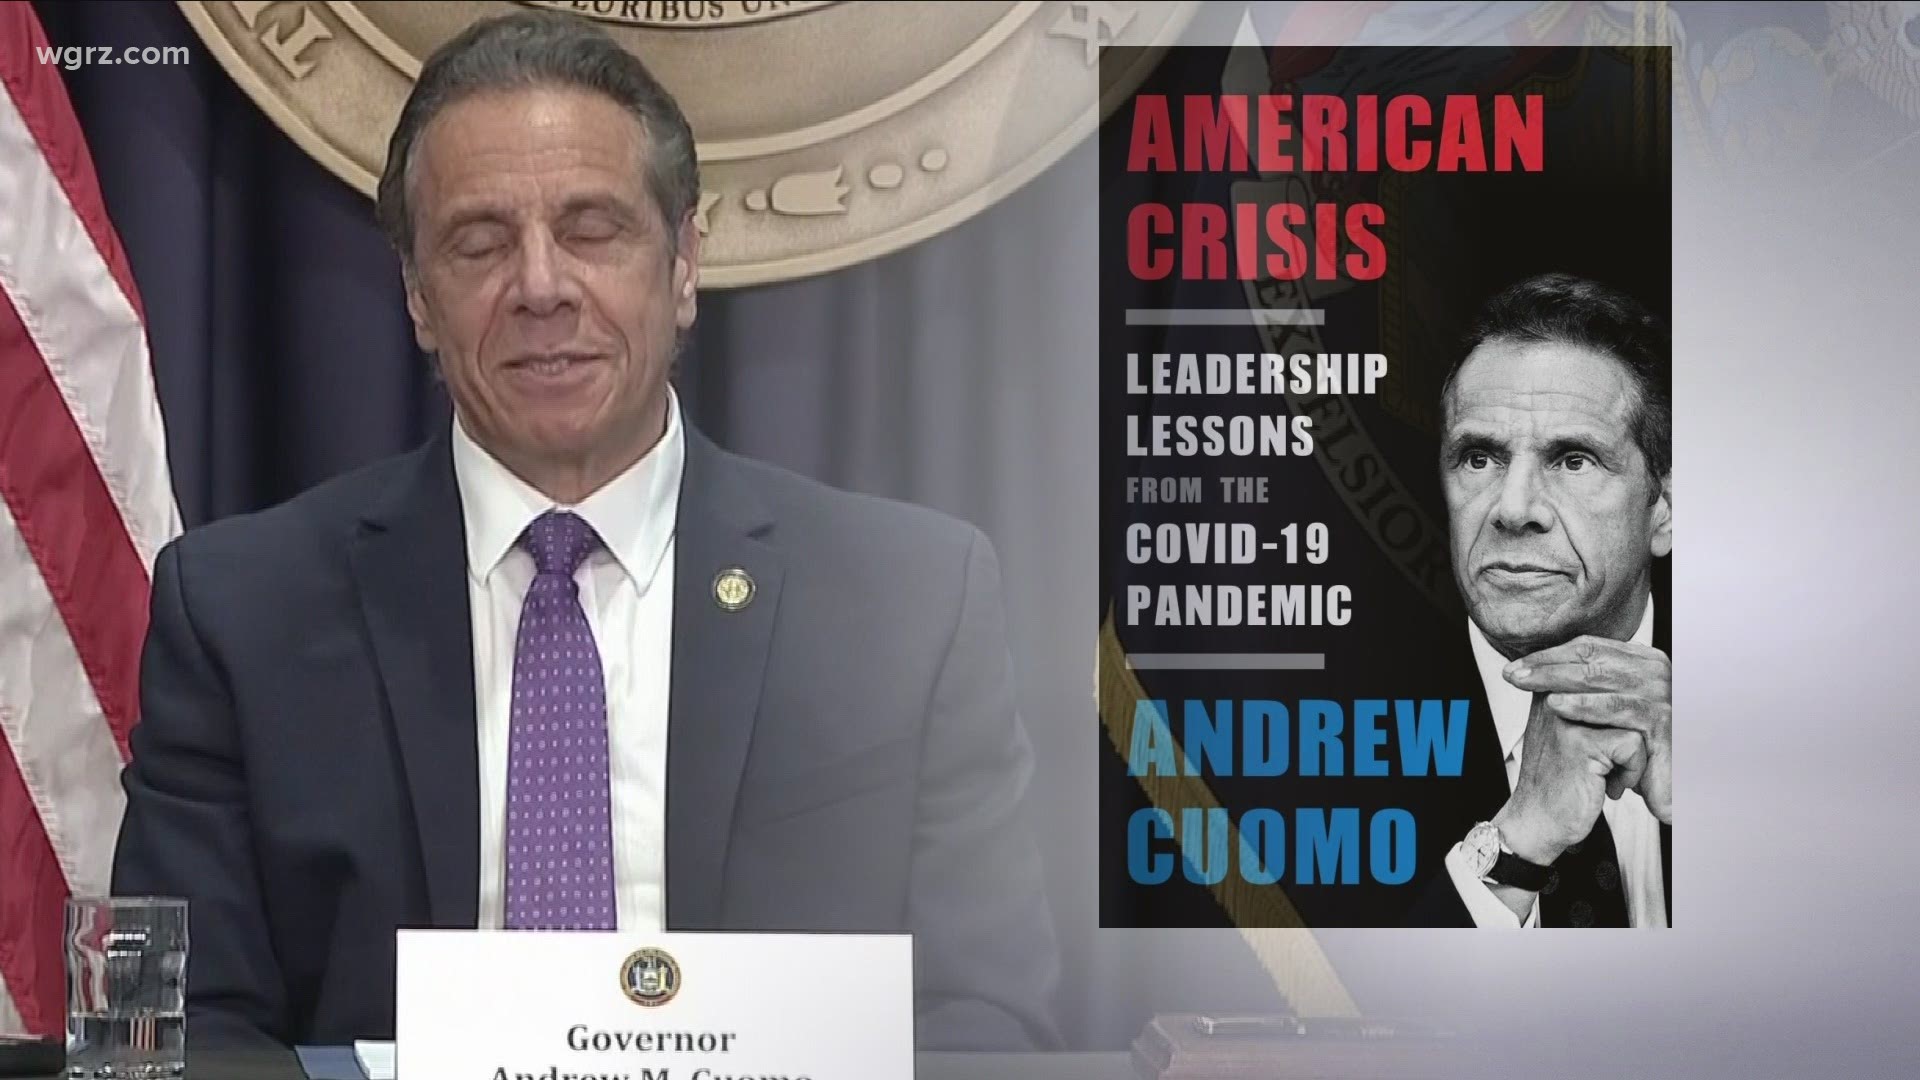 The investigations into governor Cuomo continue to mount, this time focusing on the book he released about his leadership during the covid-19 pandemic.